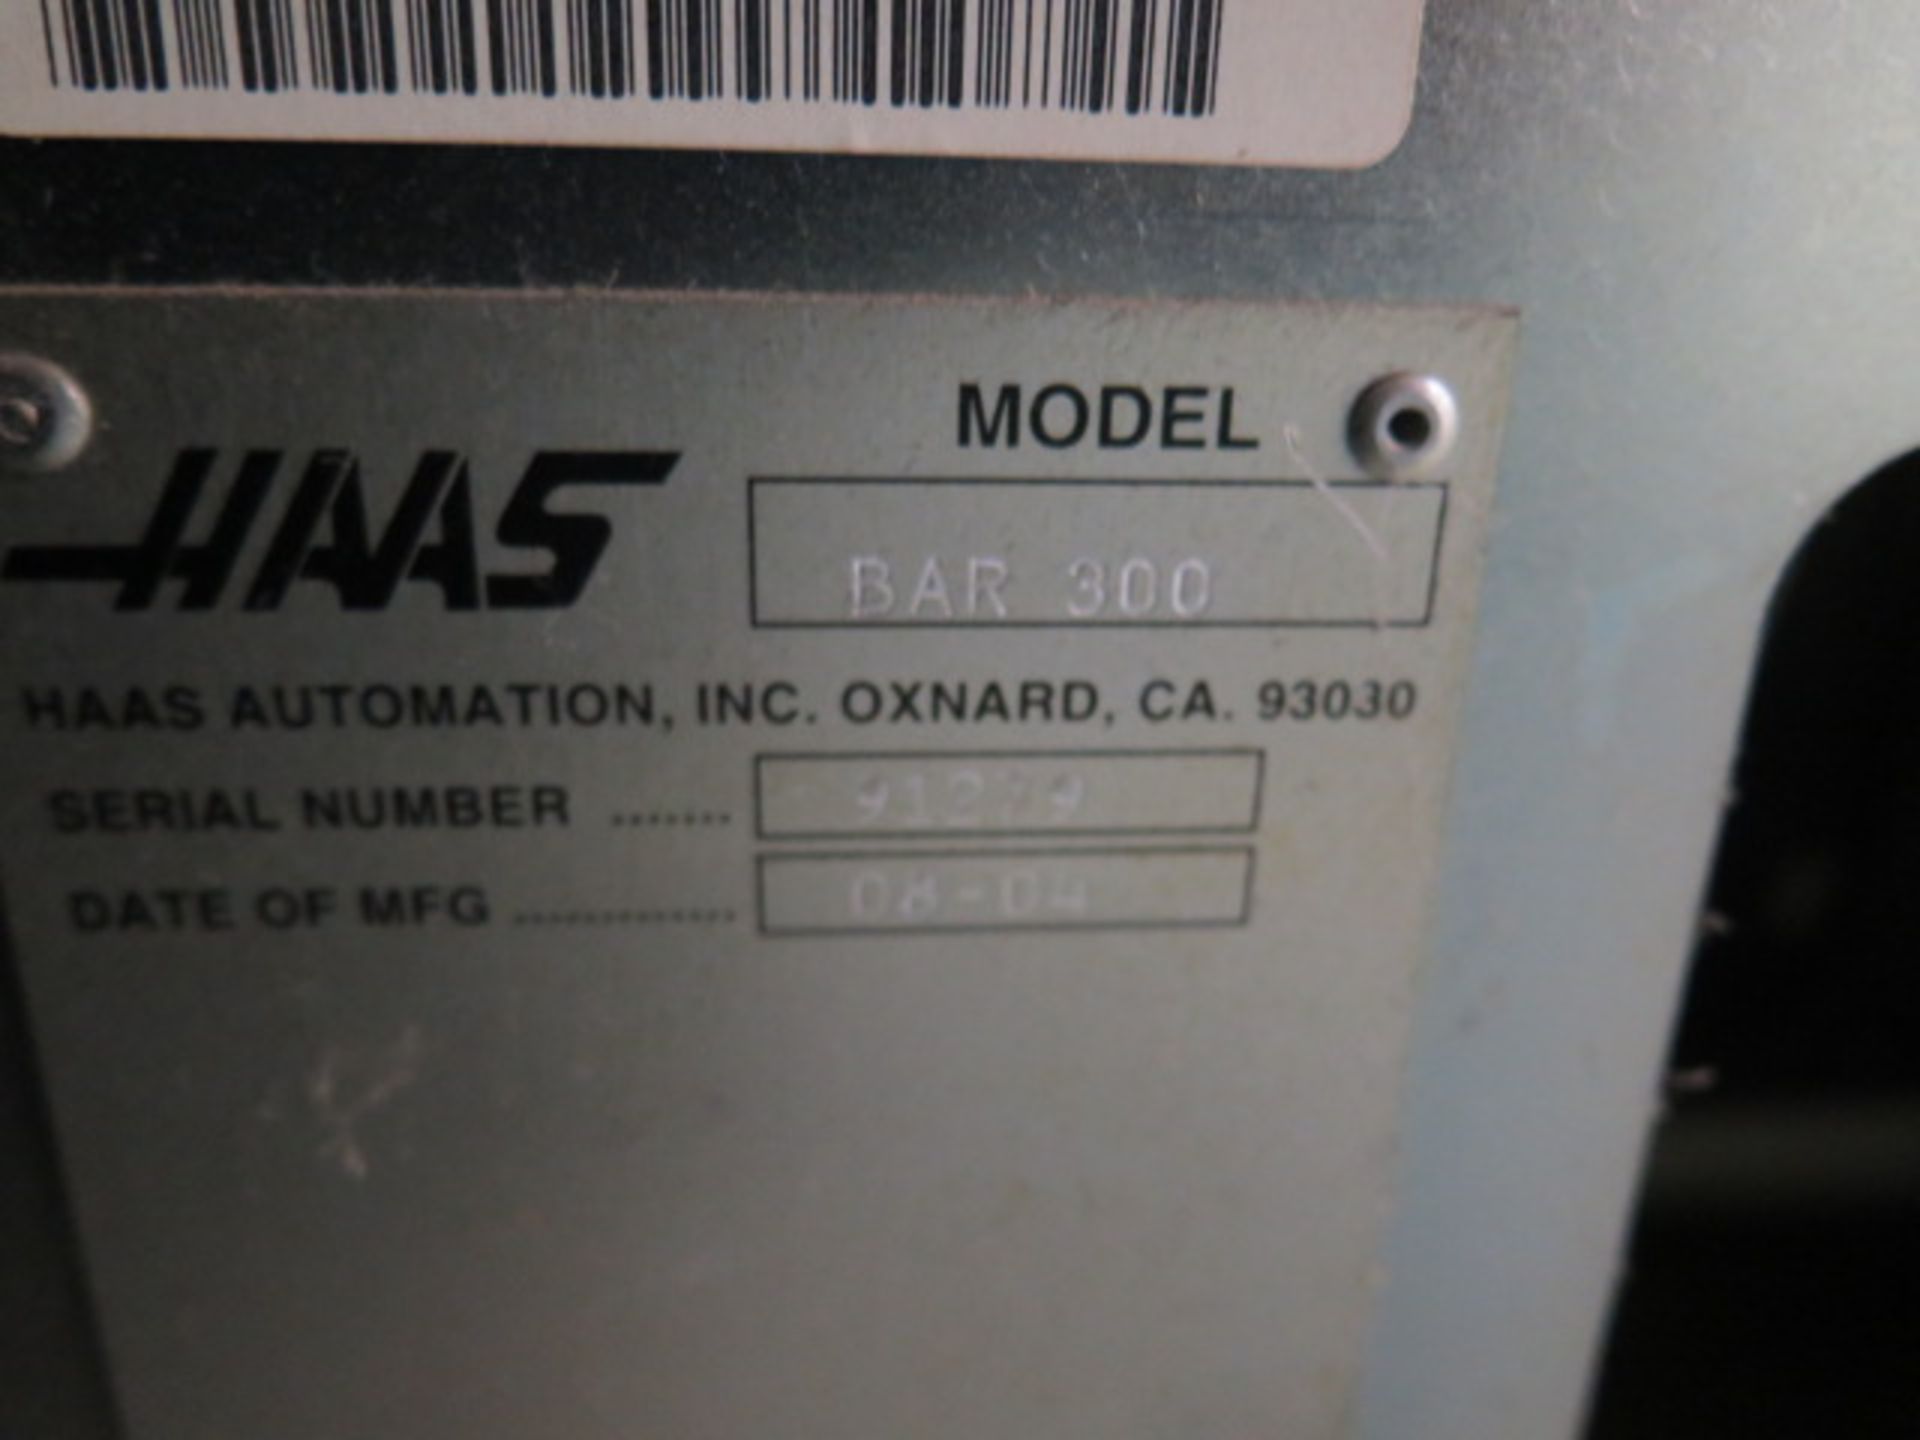 Haas Servobar 300 Automatic Bar Loader / Feeder s/n 91279 (SOLD AS-IS - NO WARRANTY) - Image 9 of 9